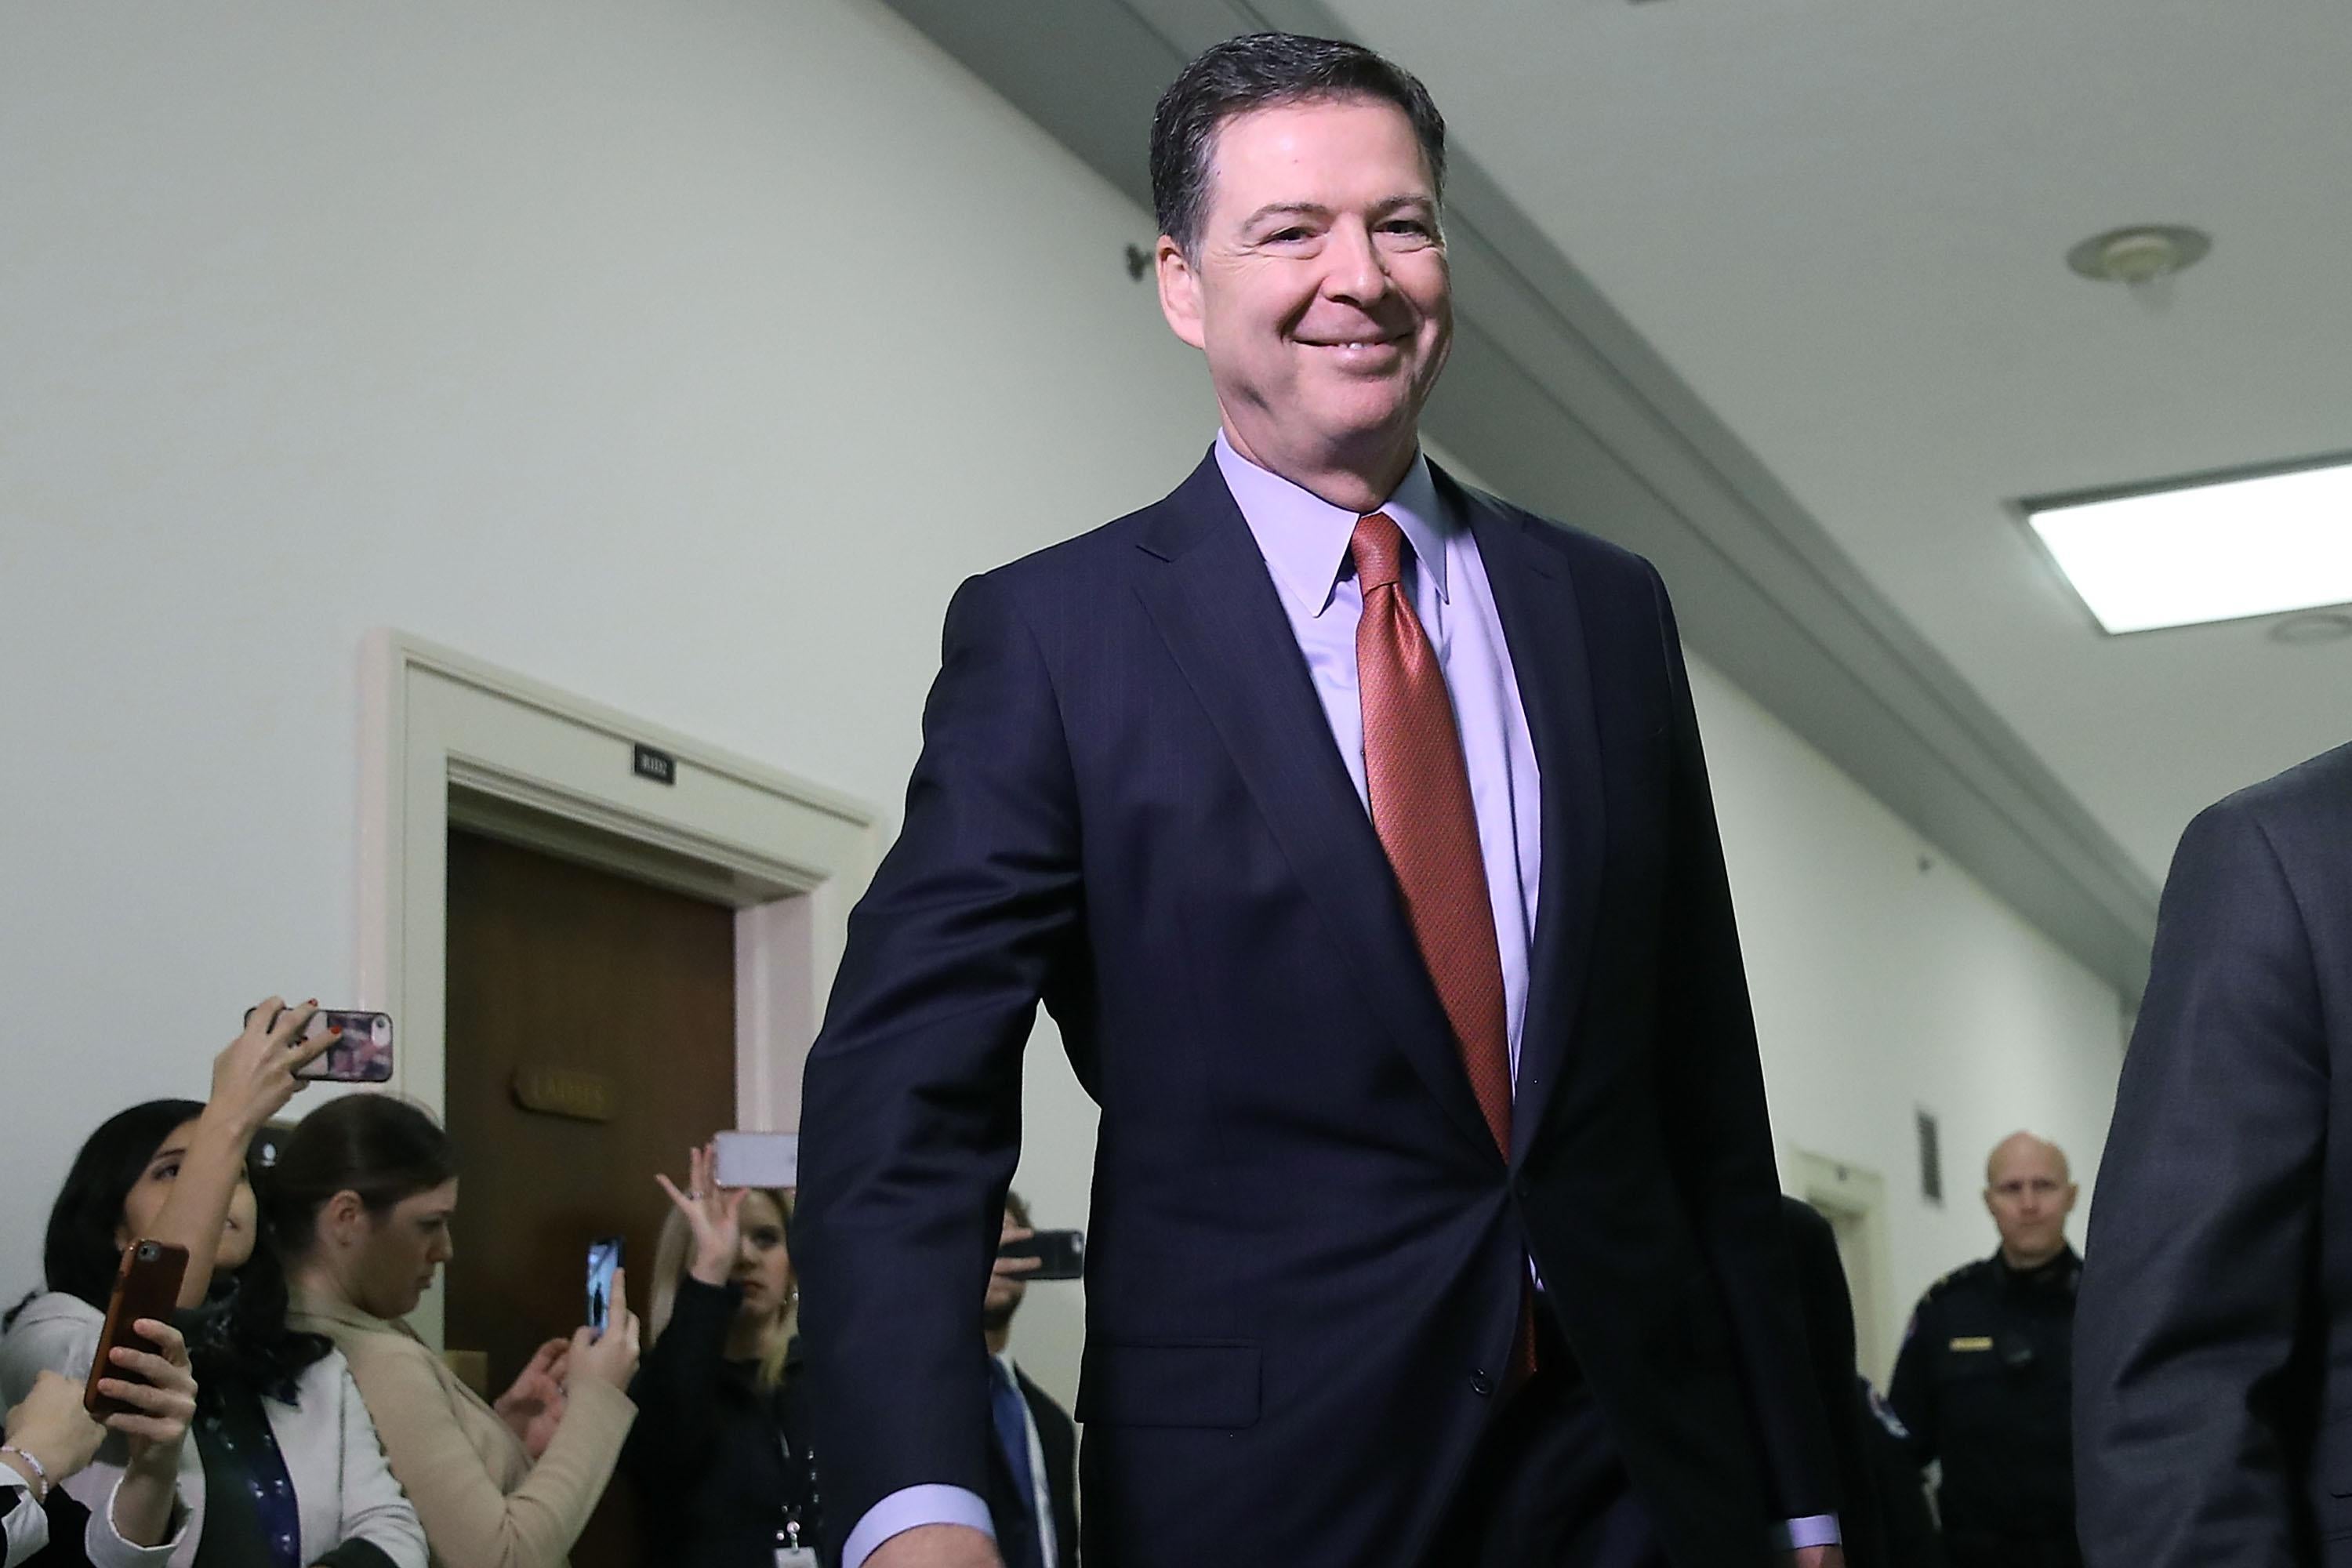 Former Federal Bureau of Investigation Director James Comey arrives at the Rayburn House Office Building before testifying to the House Judiciary and Oversight and Government Reform committees on Capitol Hill on December 17, 2018 in Washington, D.C. 